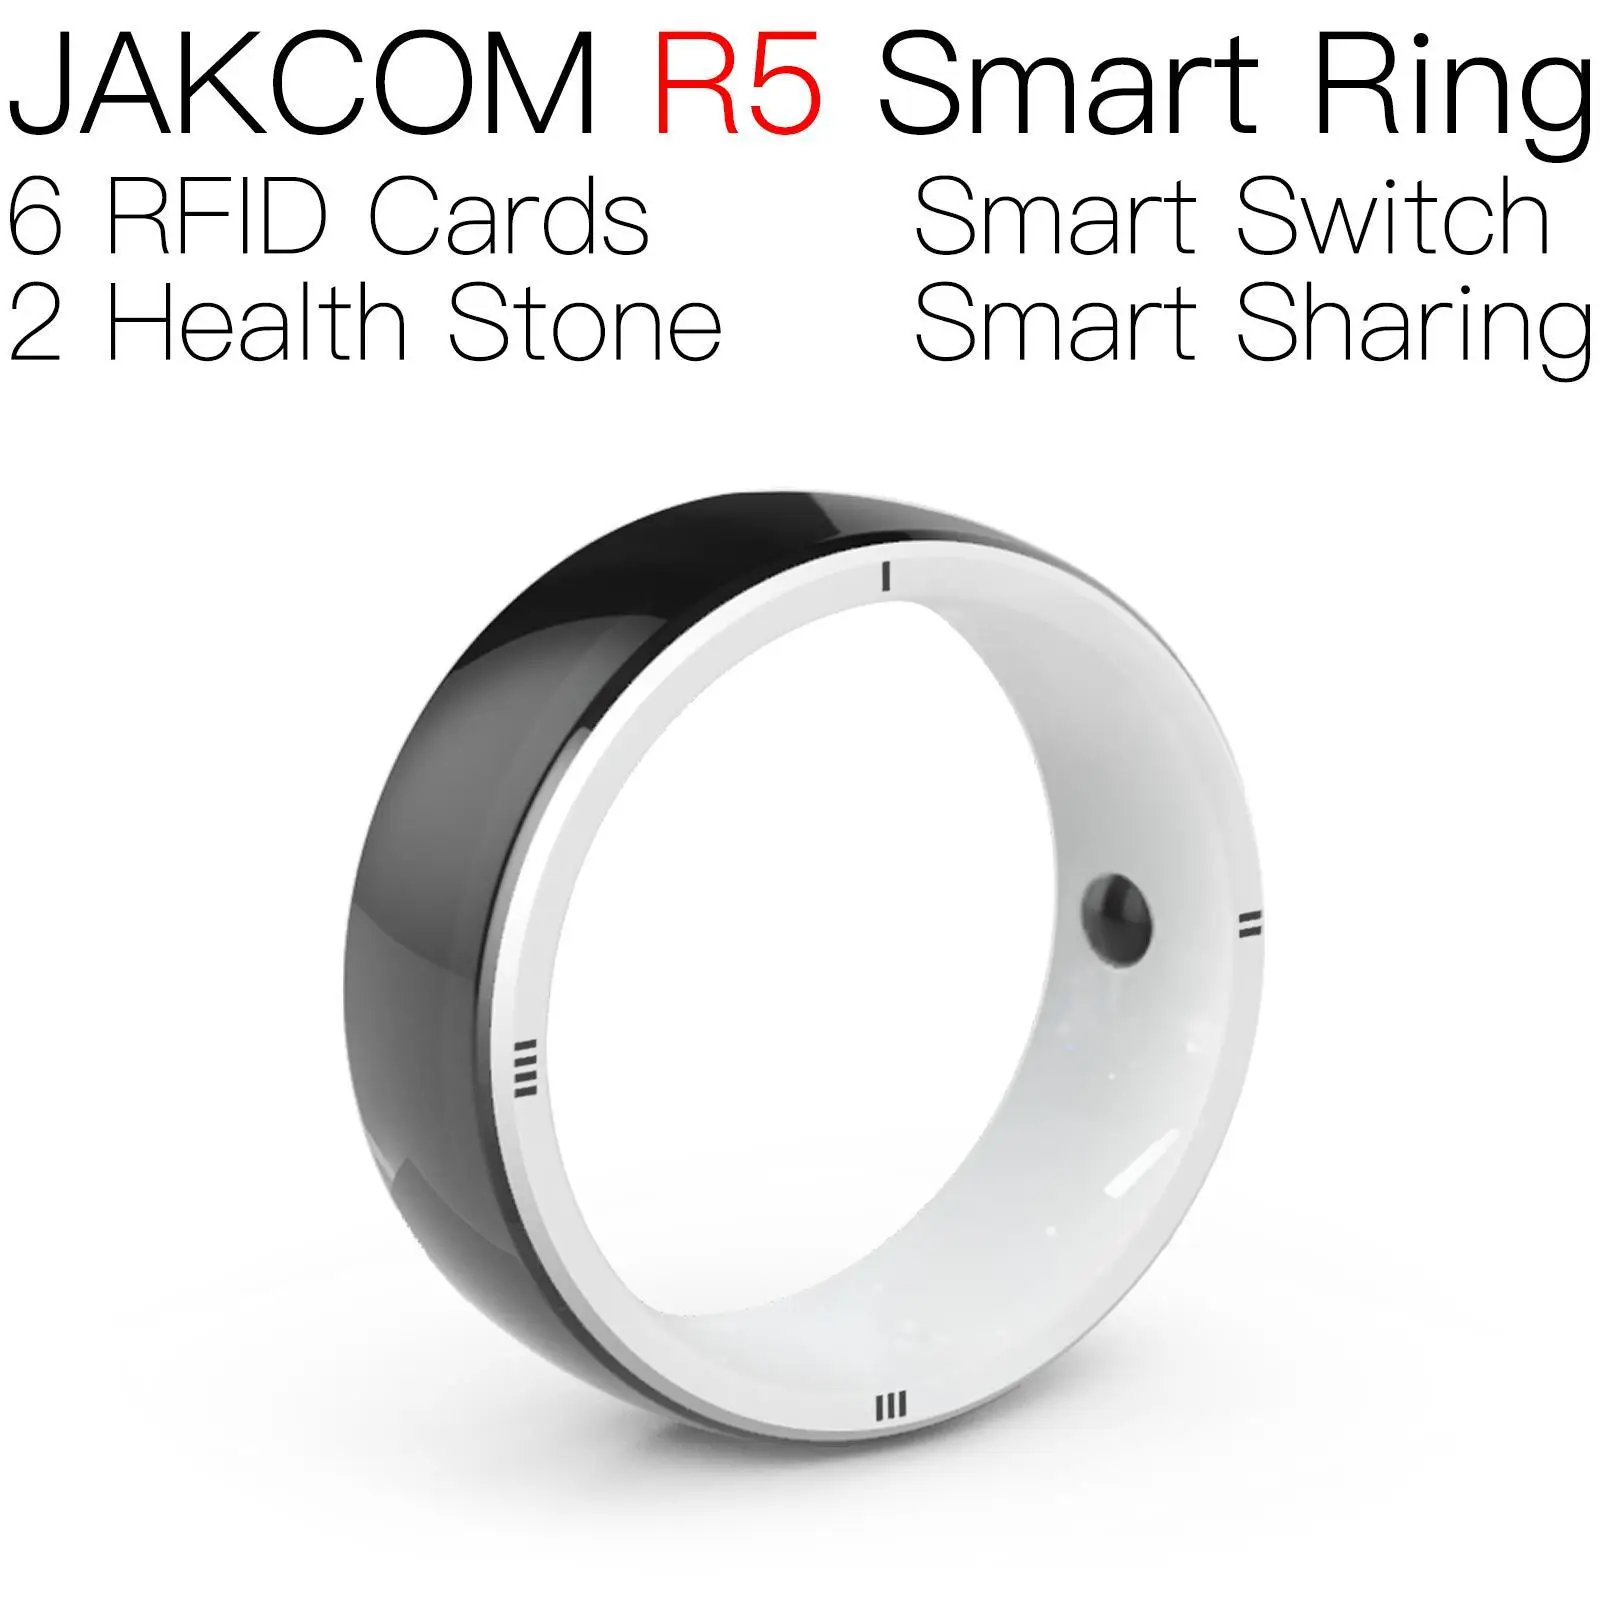 

JAKCOM R5 Smart Ring Nice than ticket bus nfc fdc chip card set 125kh rfid tag tags programmable 13 56 mhz duplicator